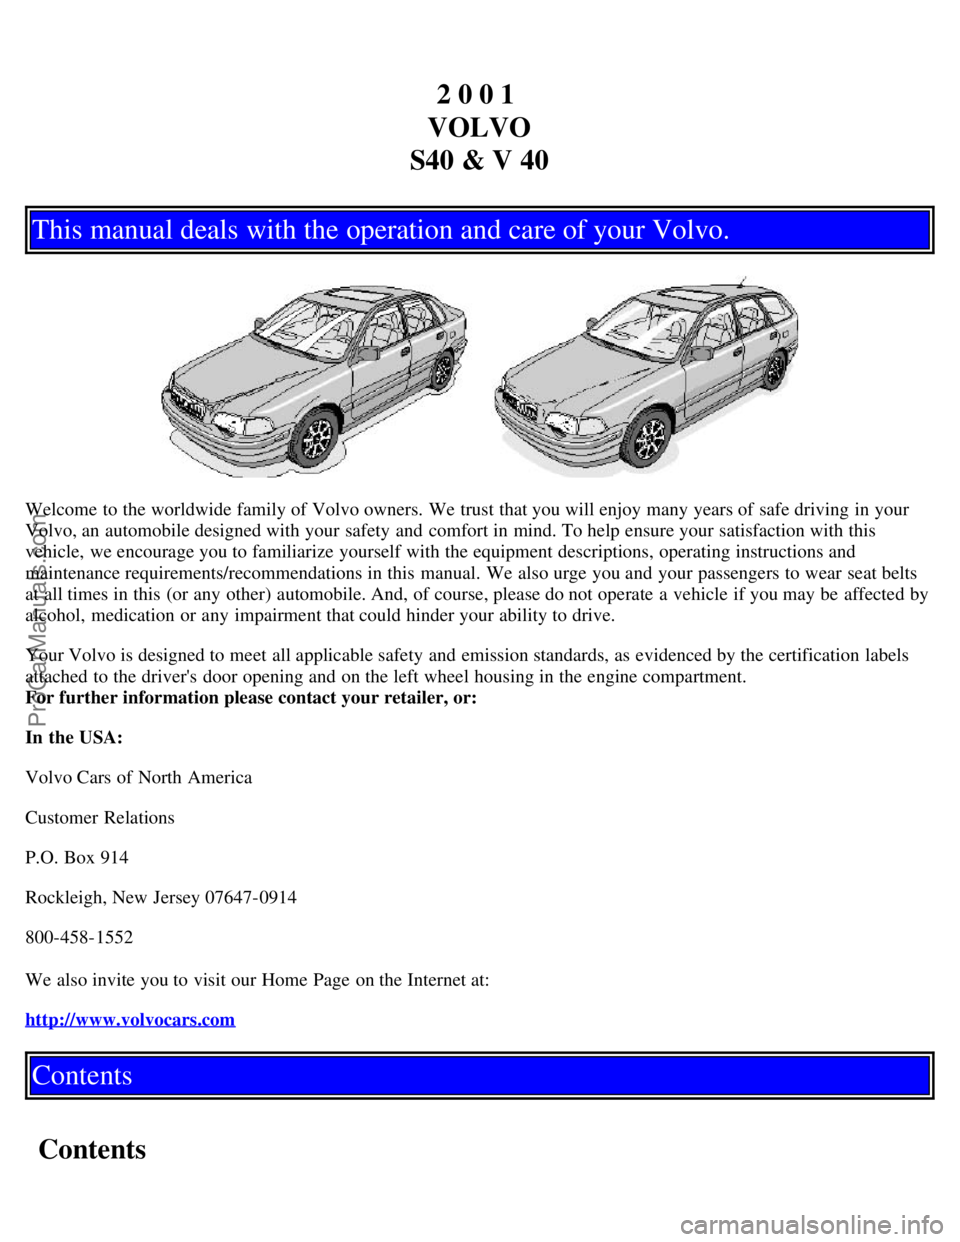 VOLVO S40 2001  Owners Manual 2 0 0 1 
VOLVO
S40 & V 40
This manual deals with the operation and care of your Volvo.
Welcome to the worldwide family of Volvo owners. We trust that you will enjoy many years of safe driving in your
